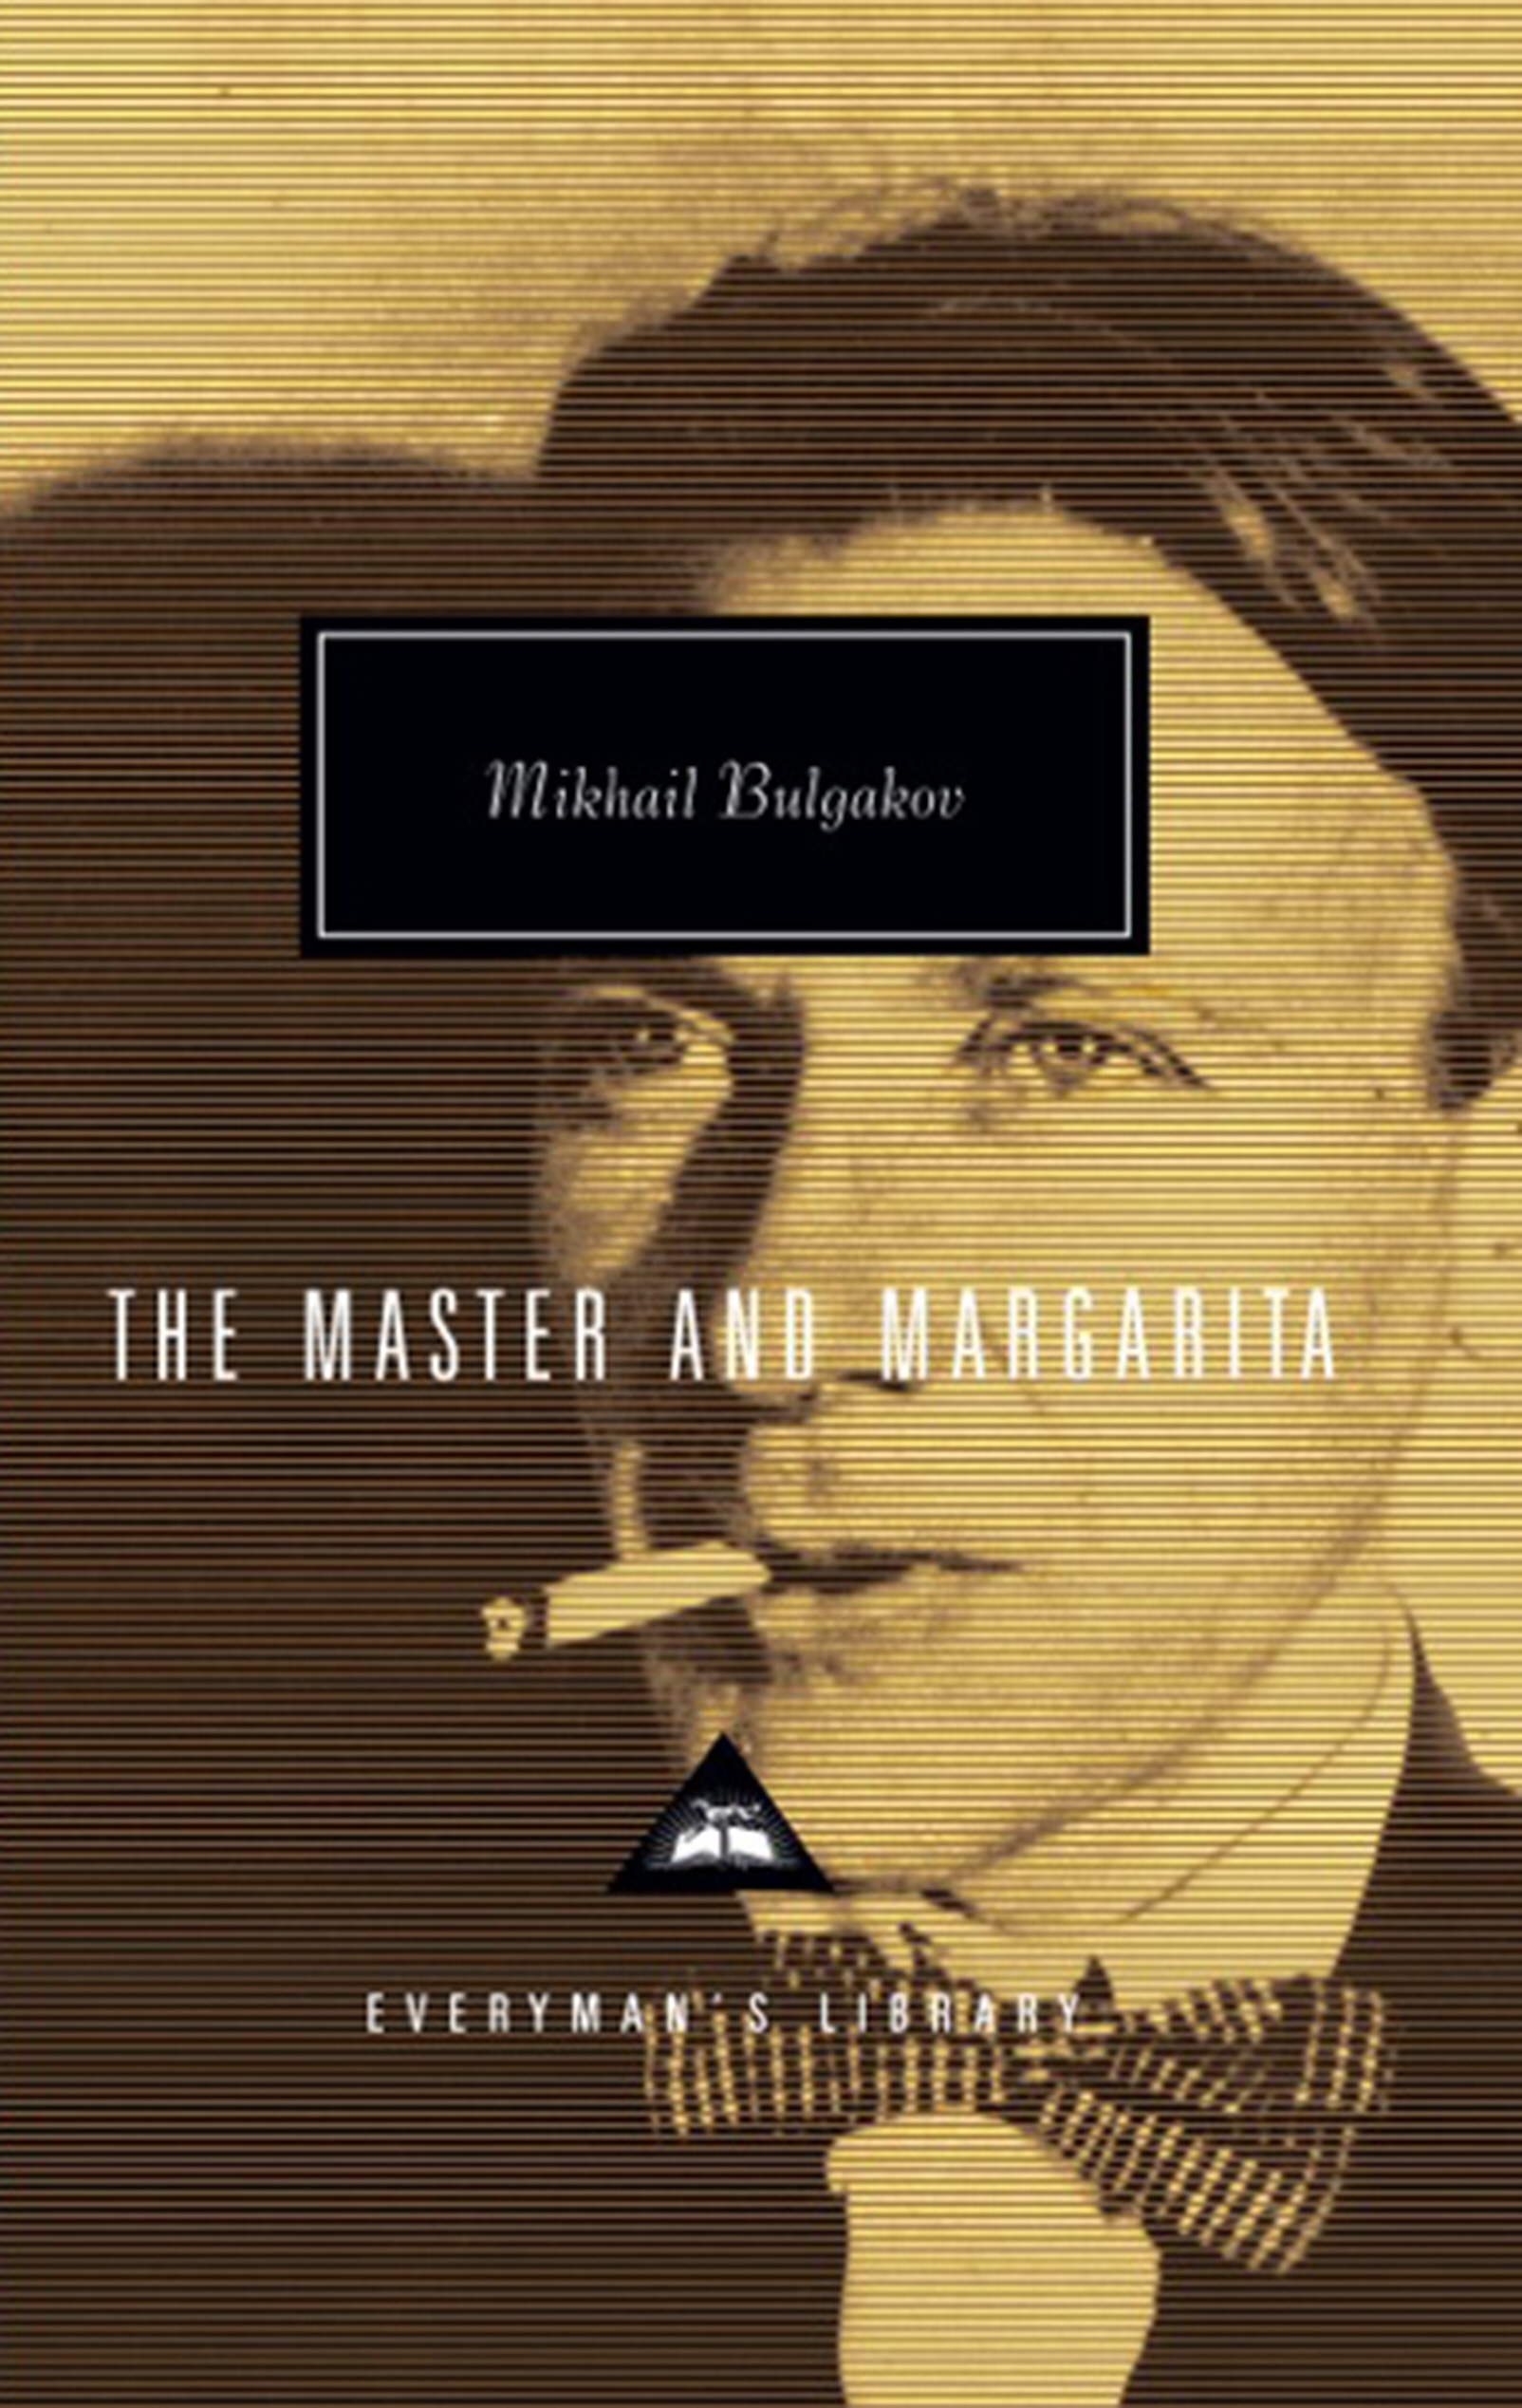 Book “The Master and Margarita” by Mikhail Bulgakov — March 19, 1992